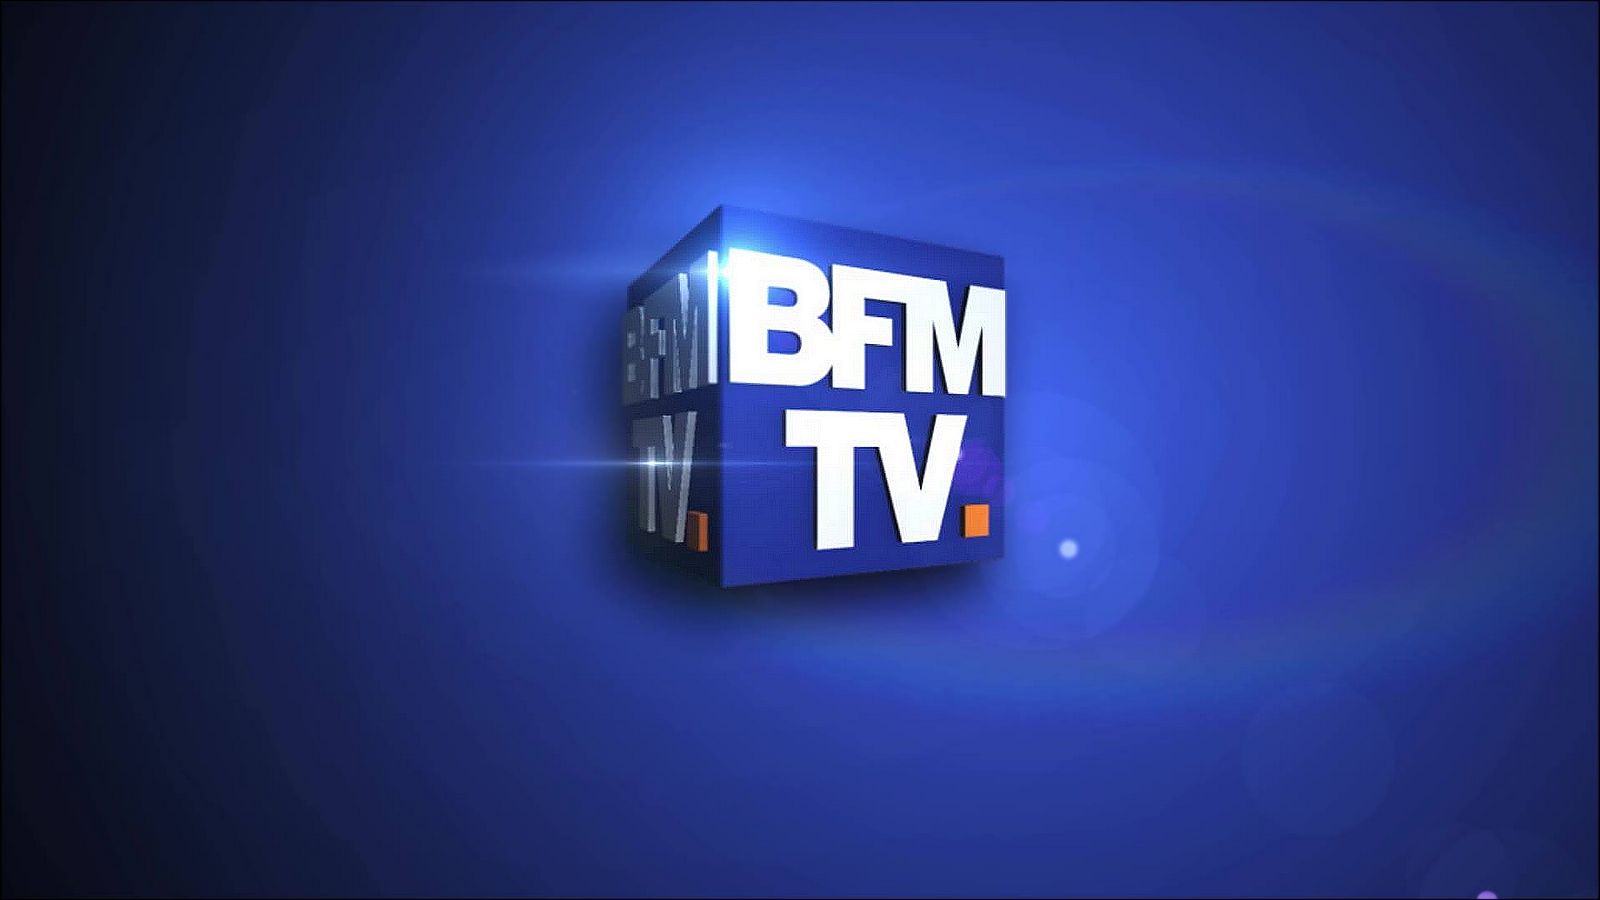 images-of-bfm-tv-japaneseclass-jp